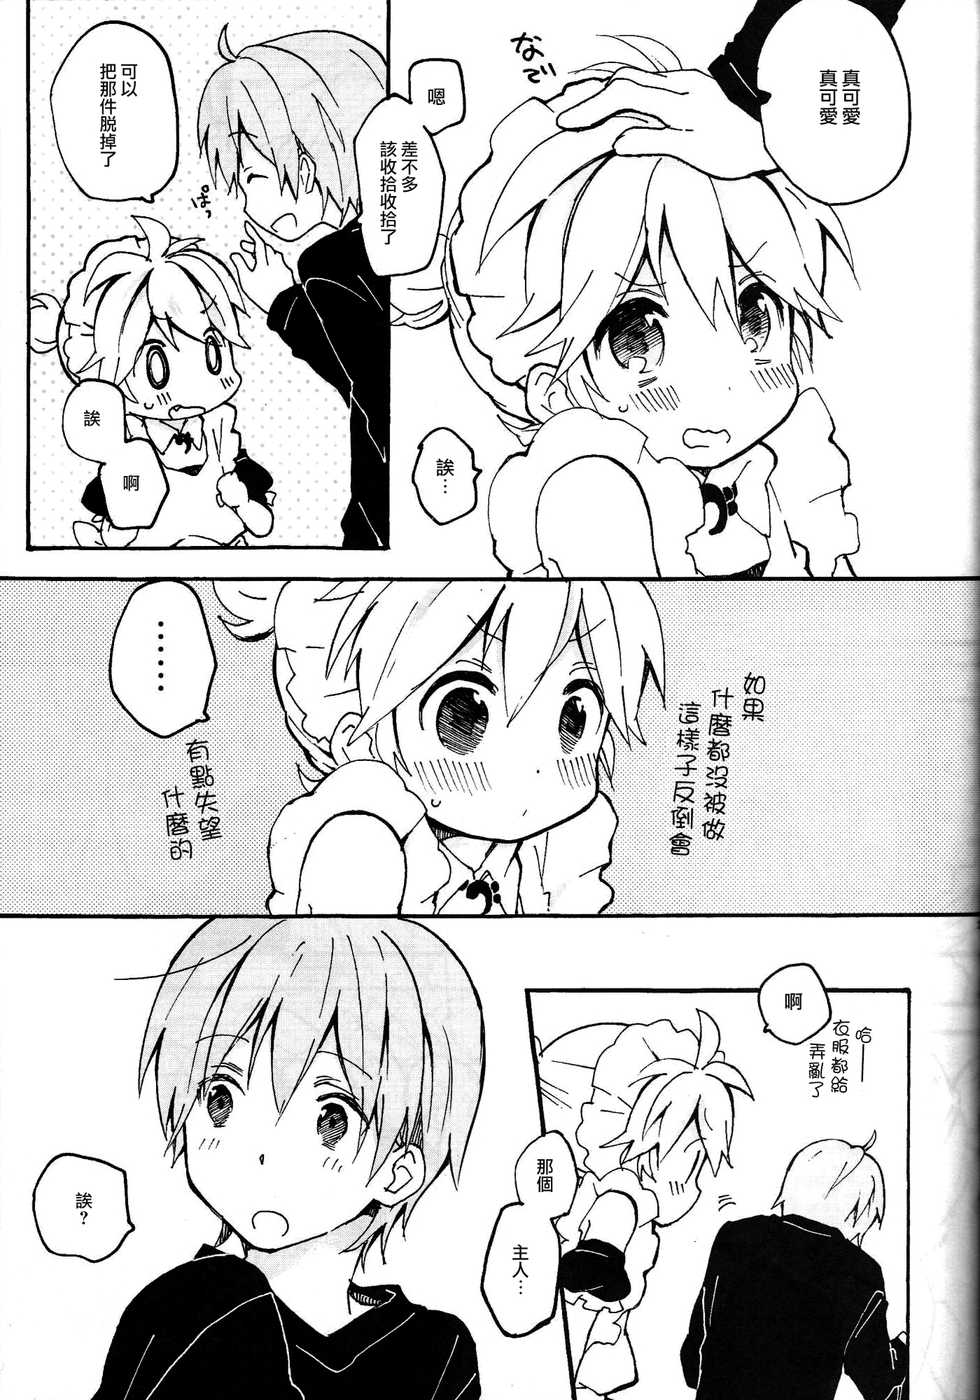 [Hey You! (Non)] Len-kun to Asobou! (VOCALOID) [Chinese] [瑞树汉化组] - Page 28